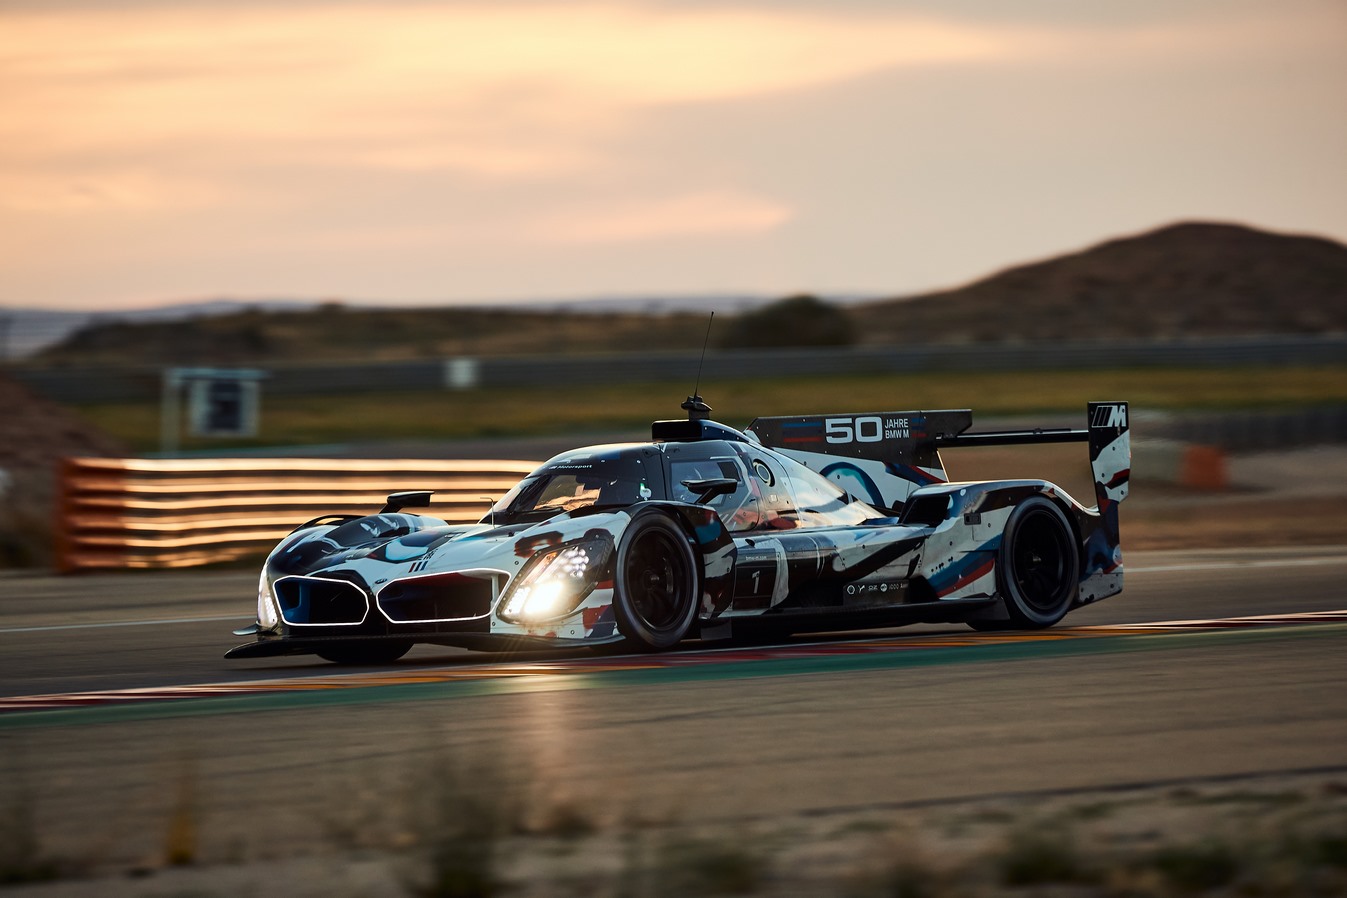 The LMDh BMW M Hybrid V8 prototype was tested on the track at night